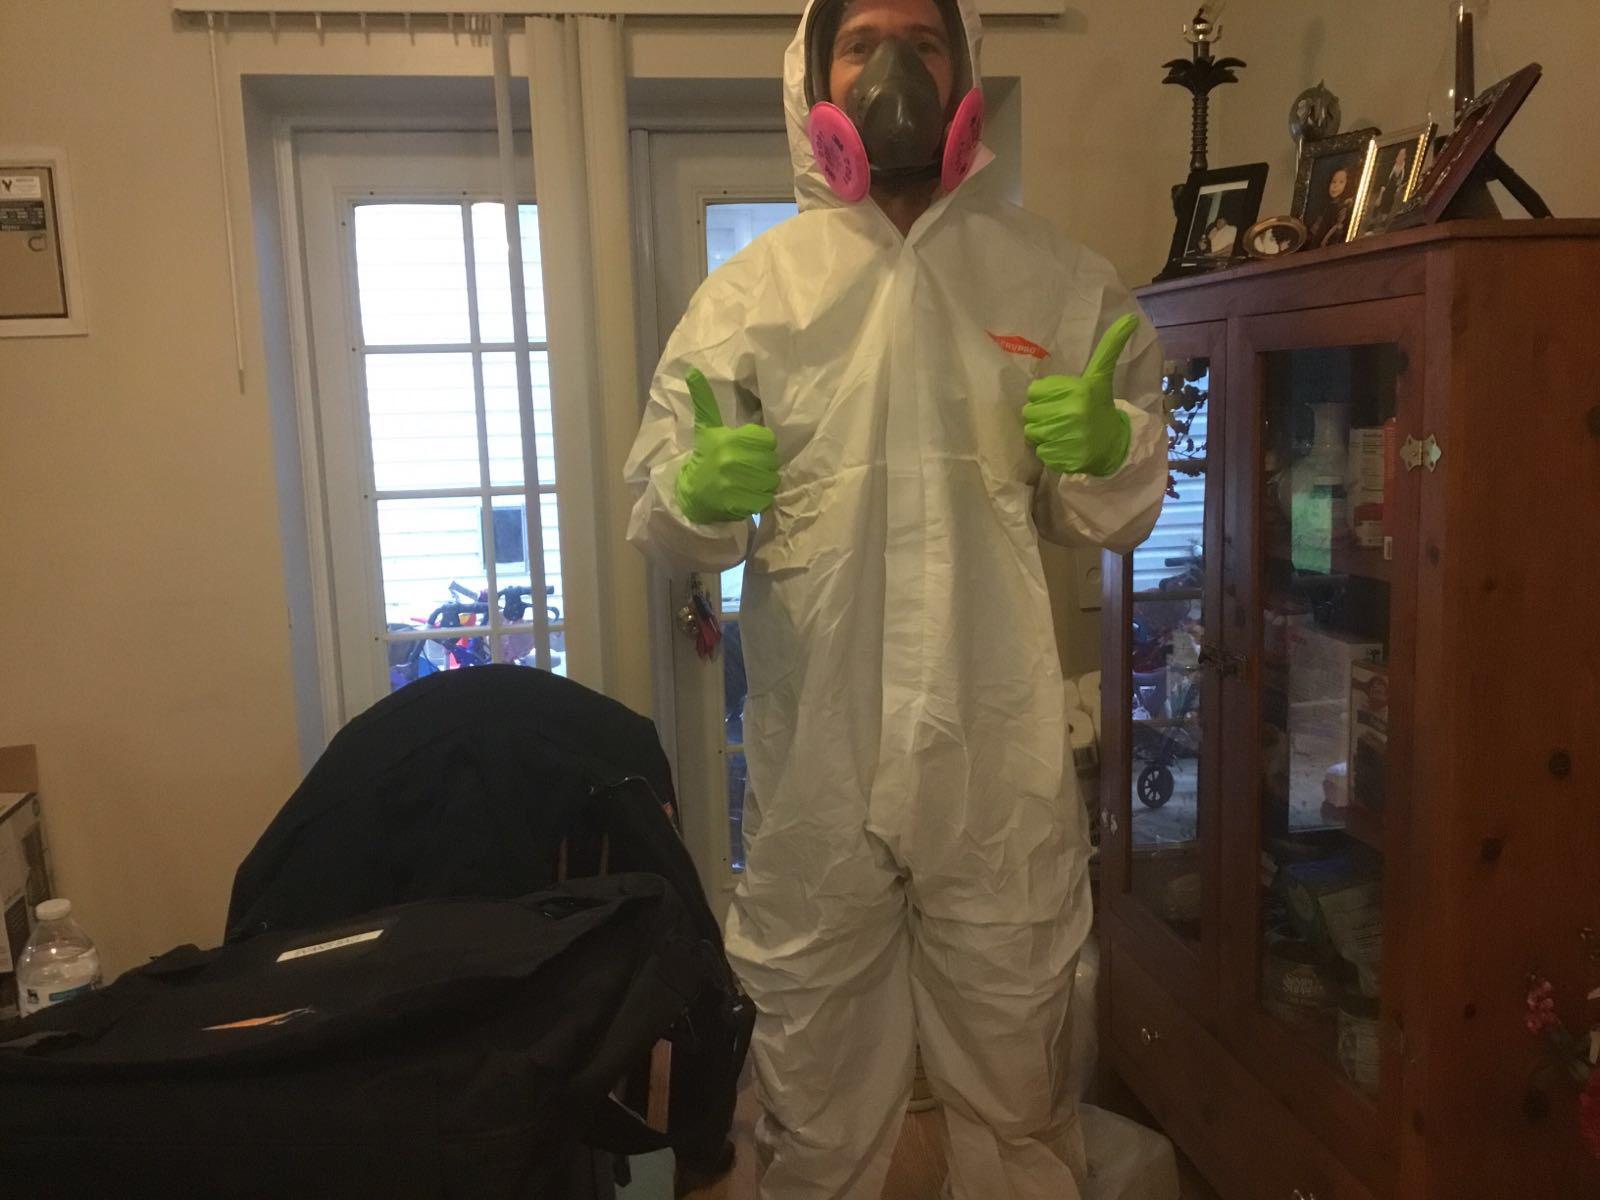 SERVPRO of Charlottesville technician in full PPE, "Here to Help" with your Biohazard, sewage back up, mold remediation, COVID-19 disinfecting, fire and water damage restoration.